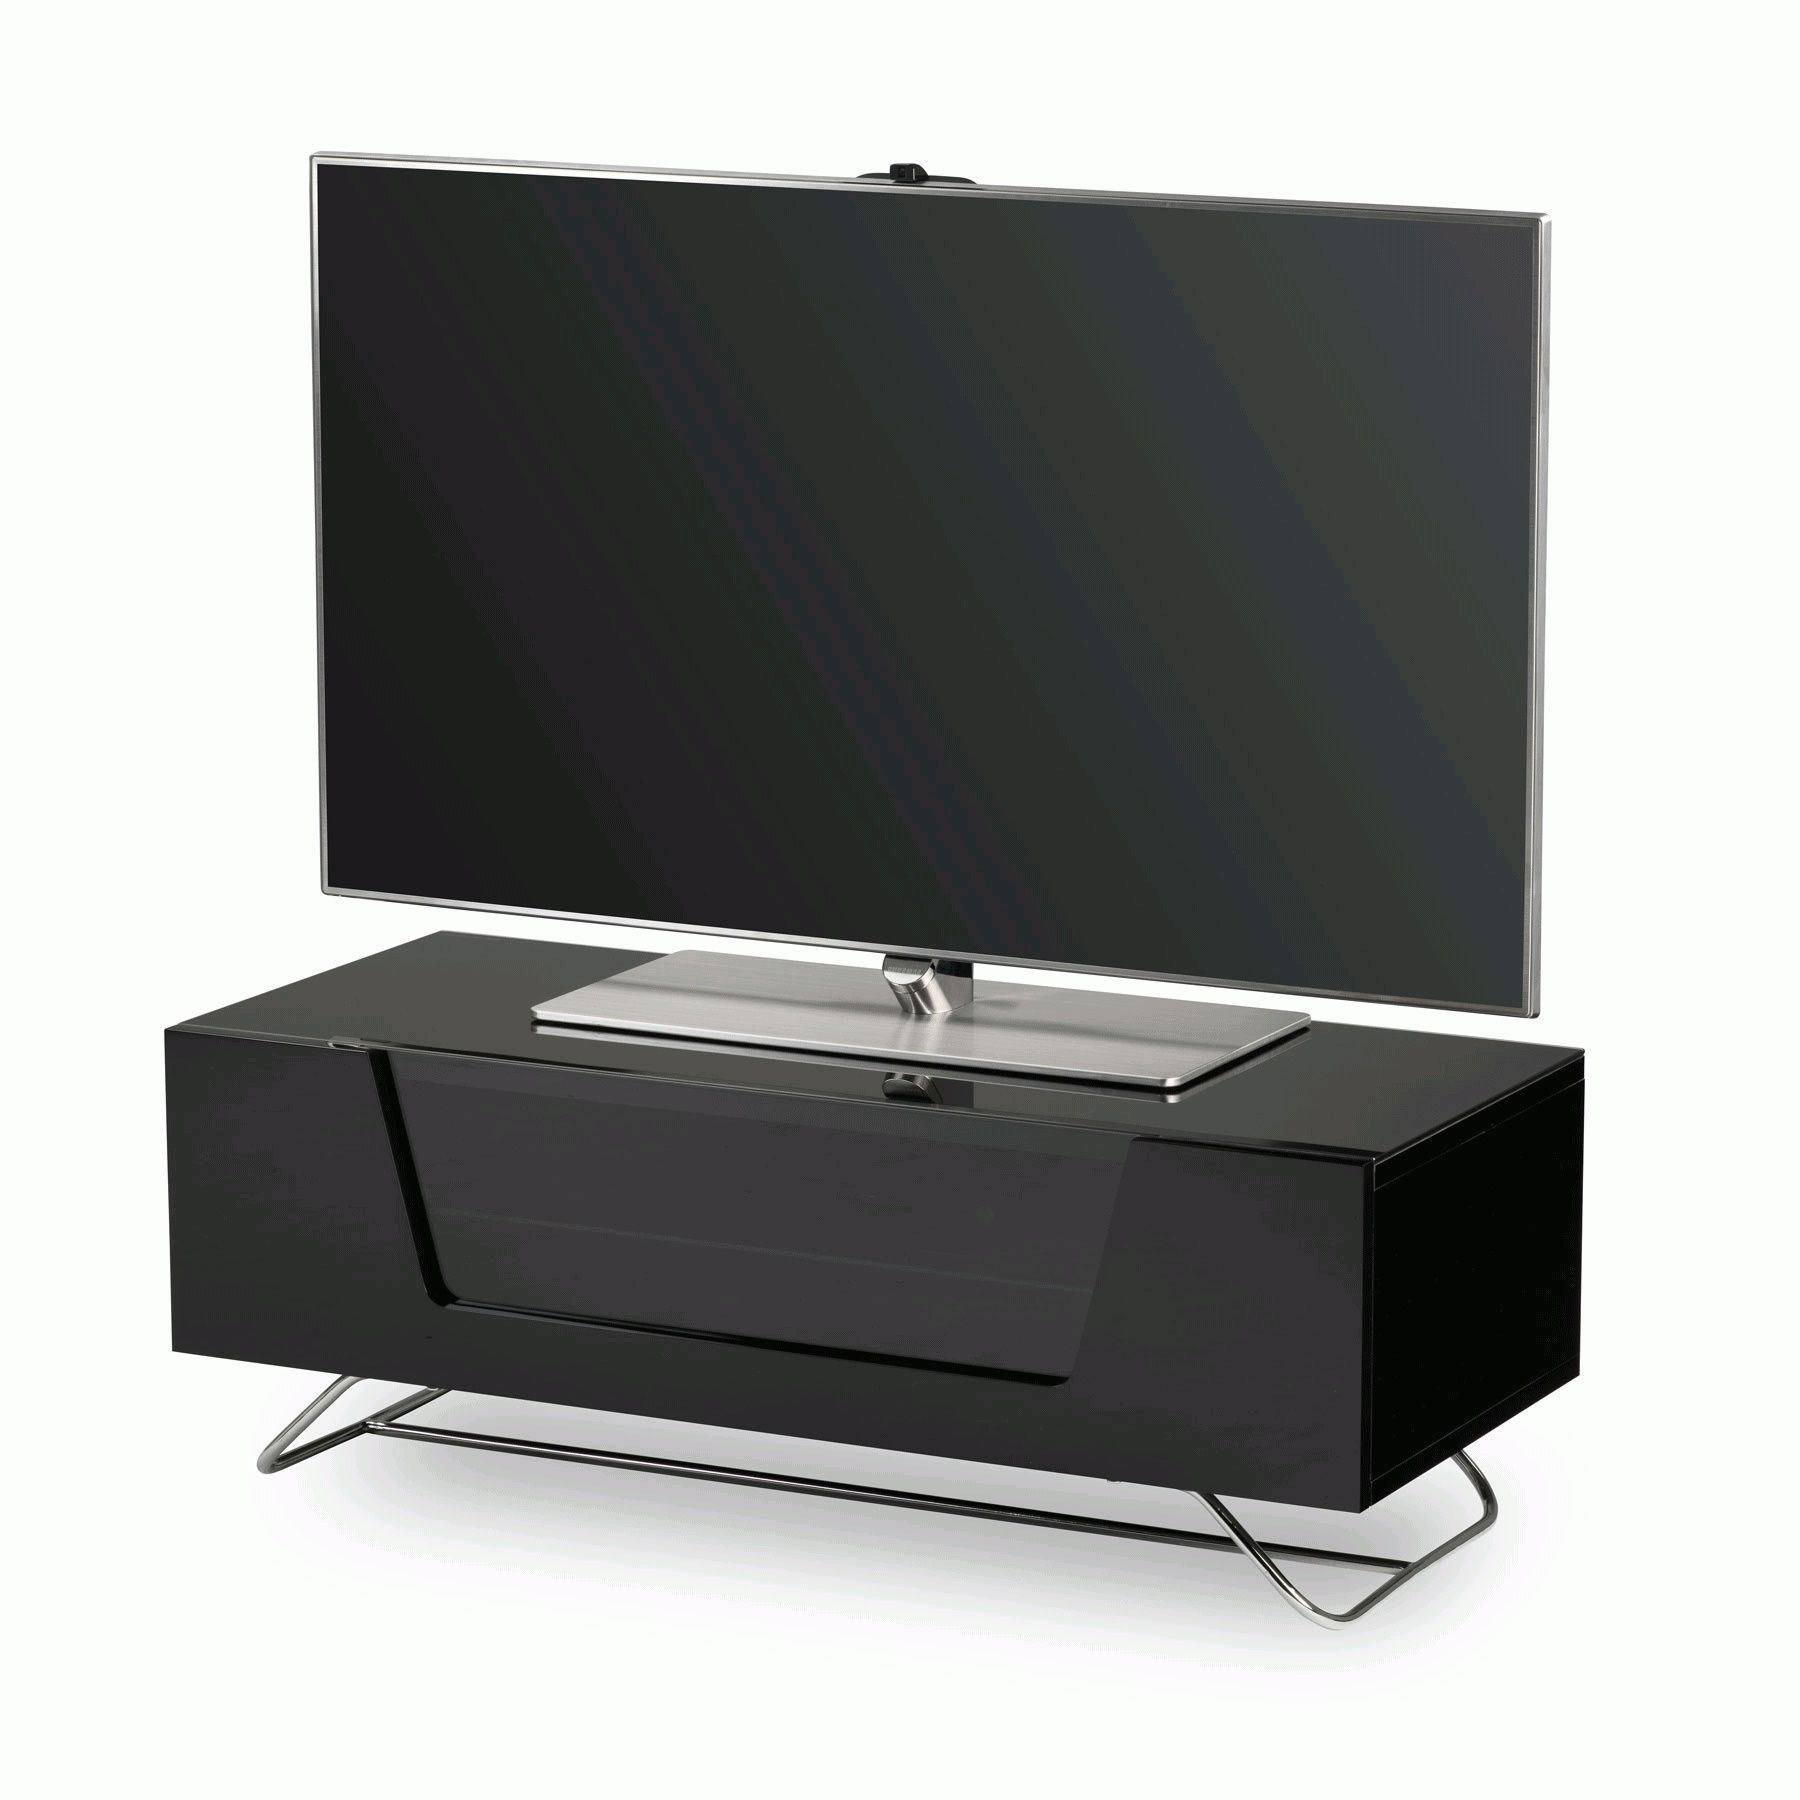 Alphason Chromium 2 100cm Black Tv Stand For Up To 50" Tvs For Tv Stands For Tvs Up To 50" (View 18 of 20)